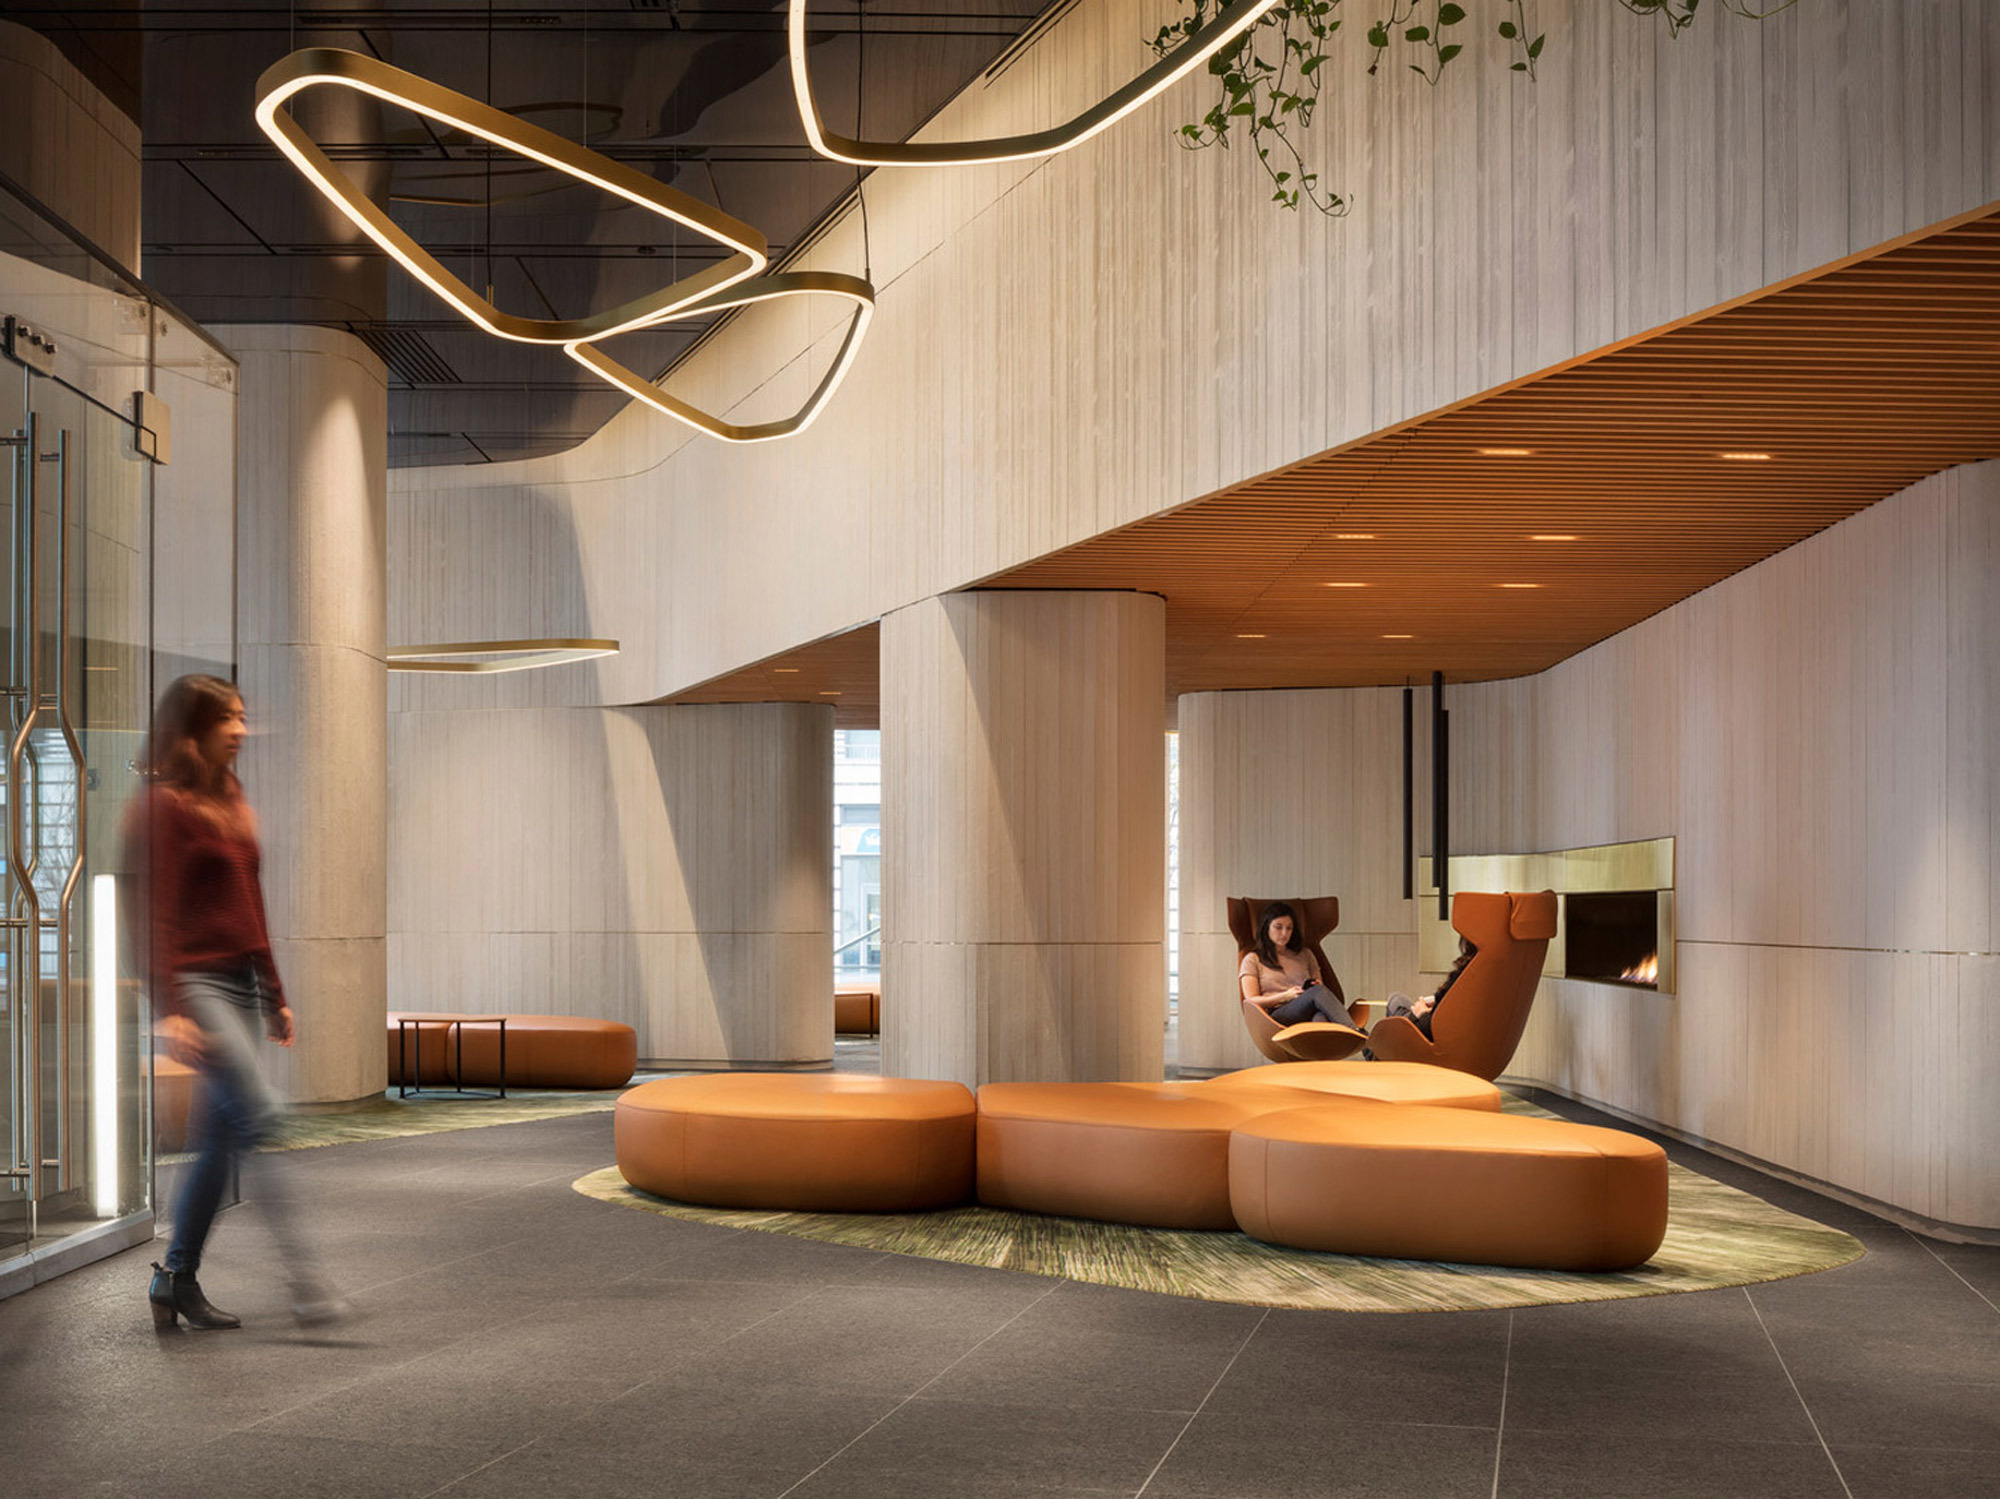 Modern lobby with organic-shaped, tan upholstered seating arrangements centered on a circular green rug, flanked by wooden wall panels and concrete columns. Sinuous, sculptural lighting fixtures hang above, enhancing the contemporary aesthetic. Blurred figures imply motion, suggesting a bustling atmosphere.